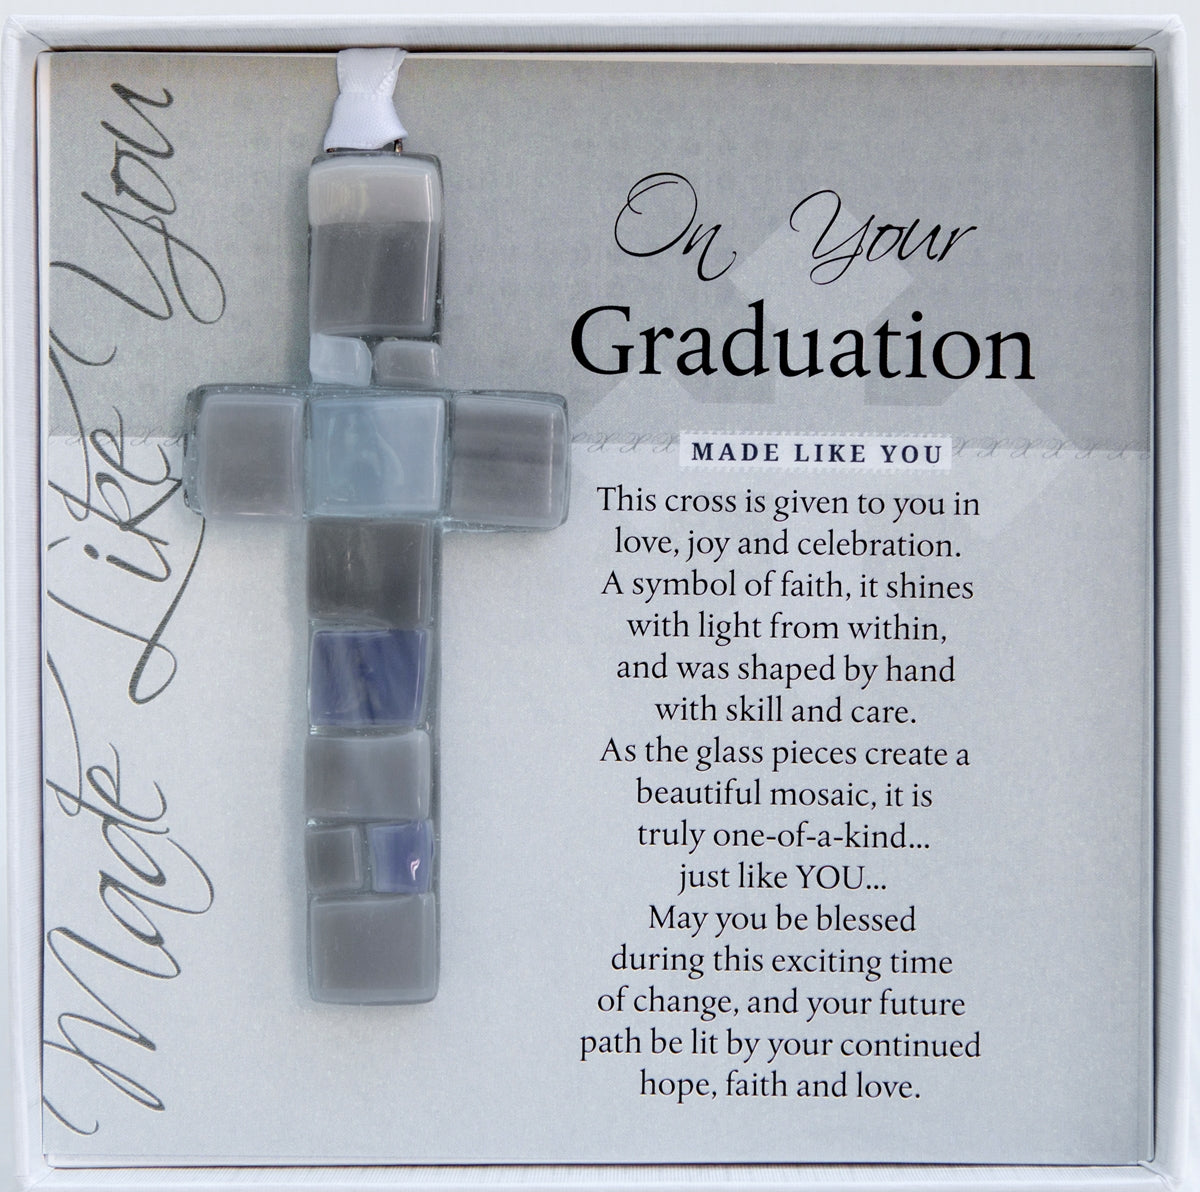 Graduation gift handmade 4" gray toned mosaic glass cross and sentiment in white box with clear lid